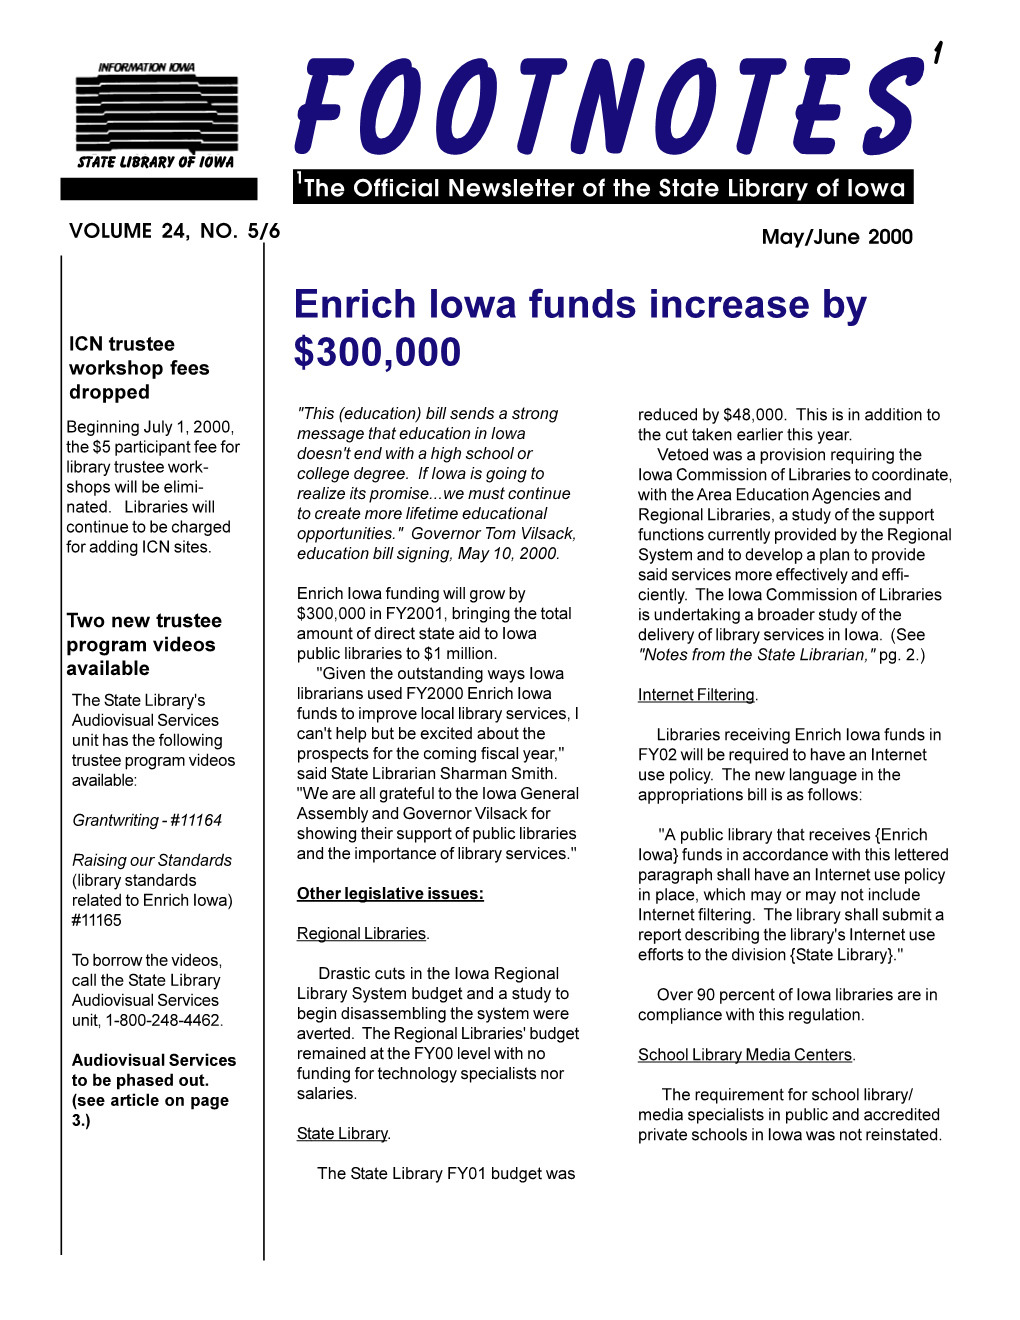 Enrich Iowa Funds Increase by $300,000